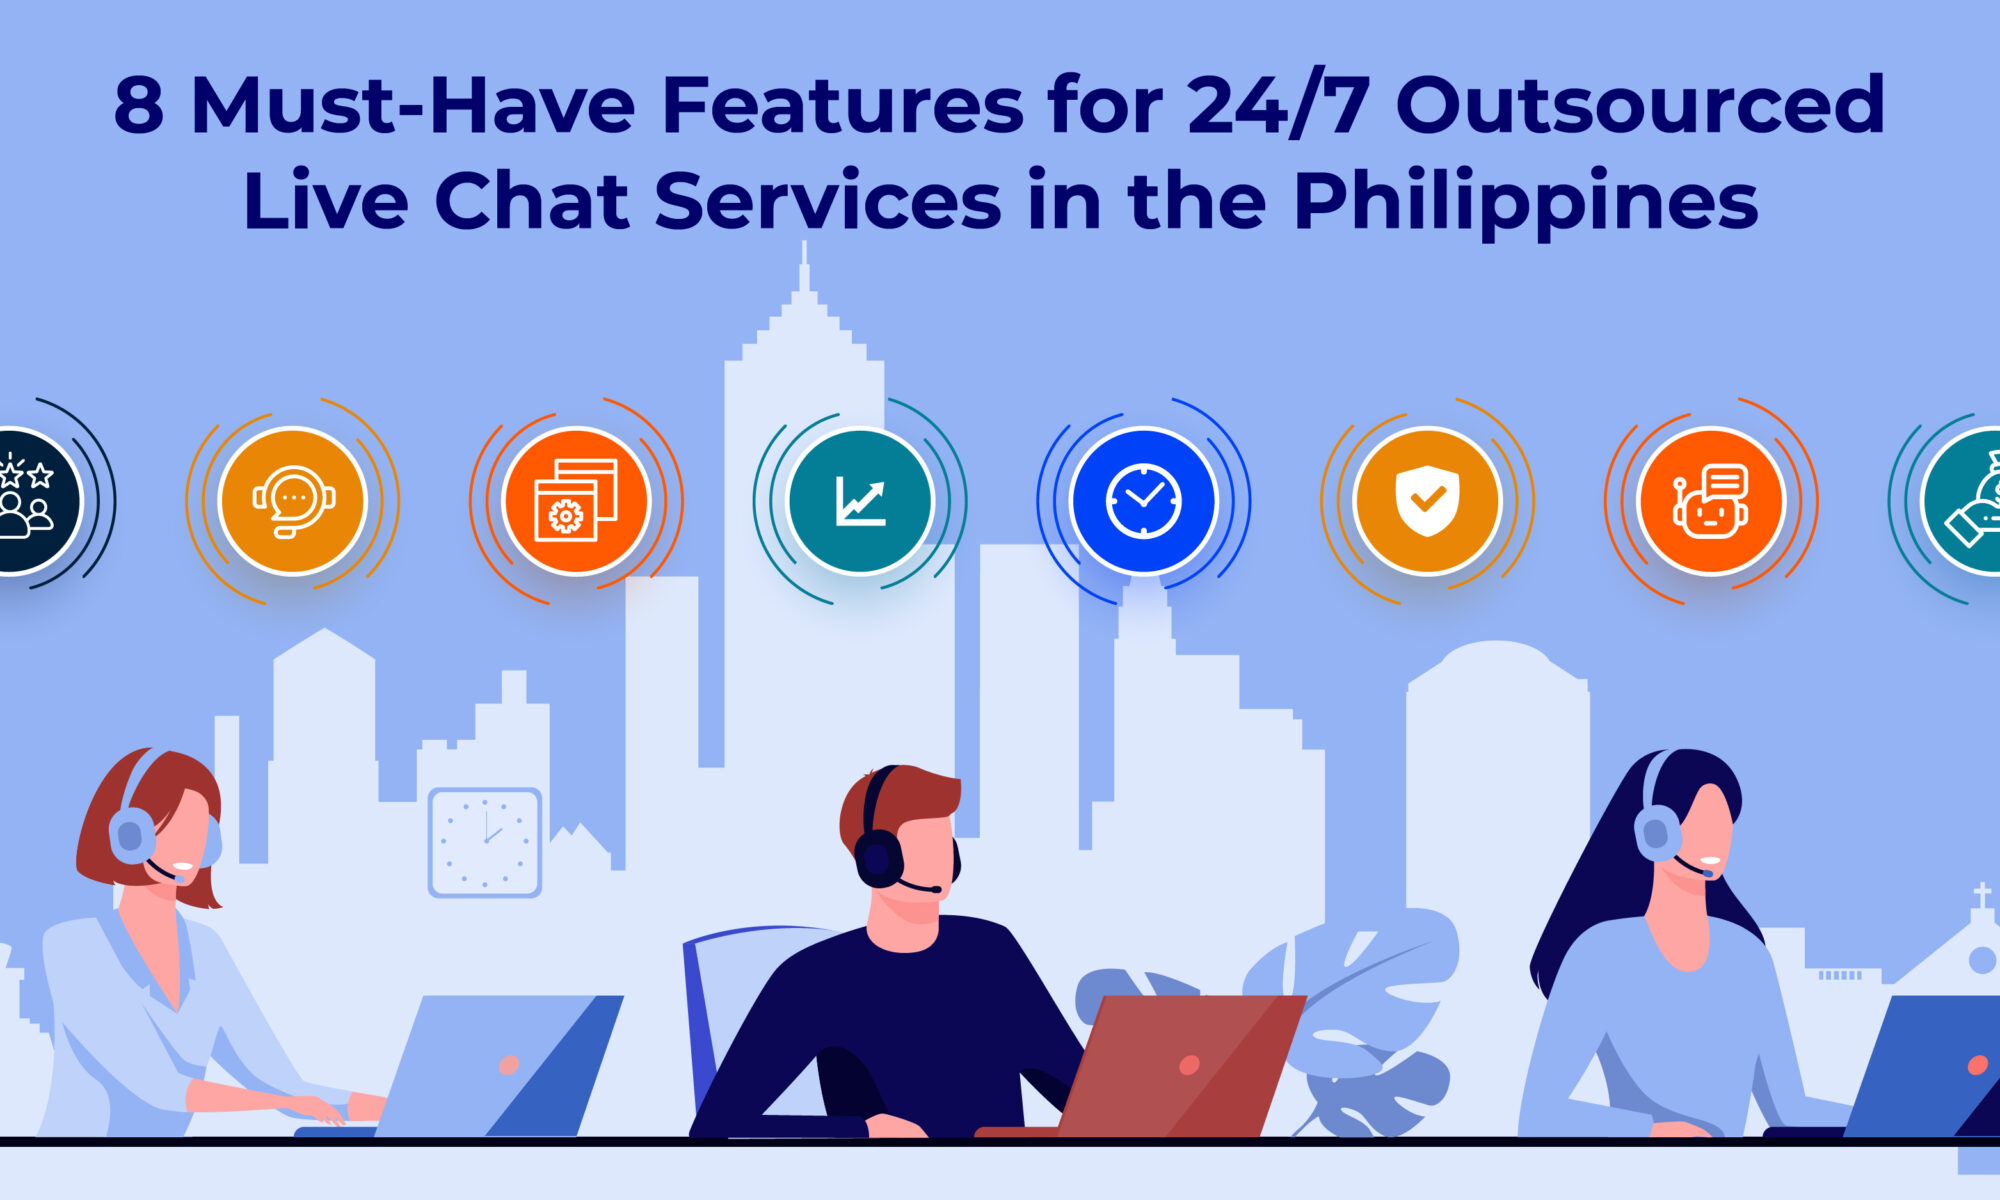 Wow_8 Must_Have Features for 24_7 Outsourced Live Chat Services in the Philippines